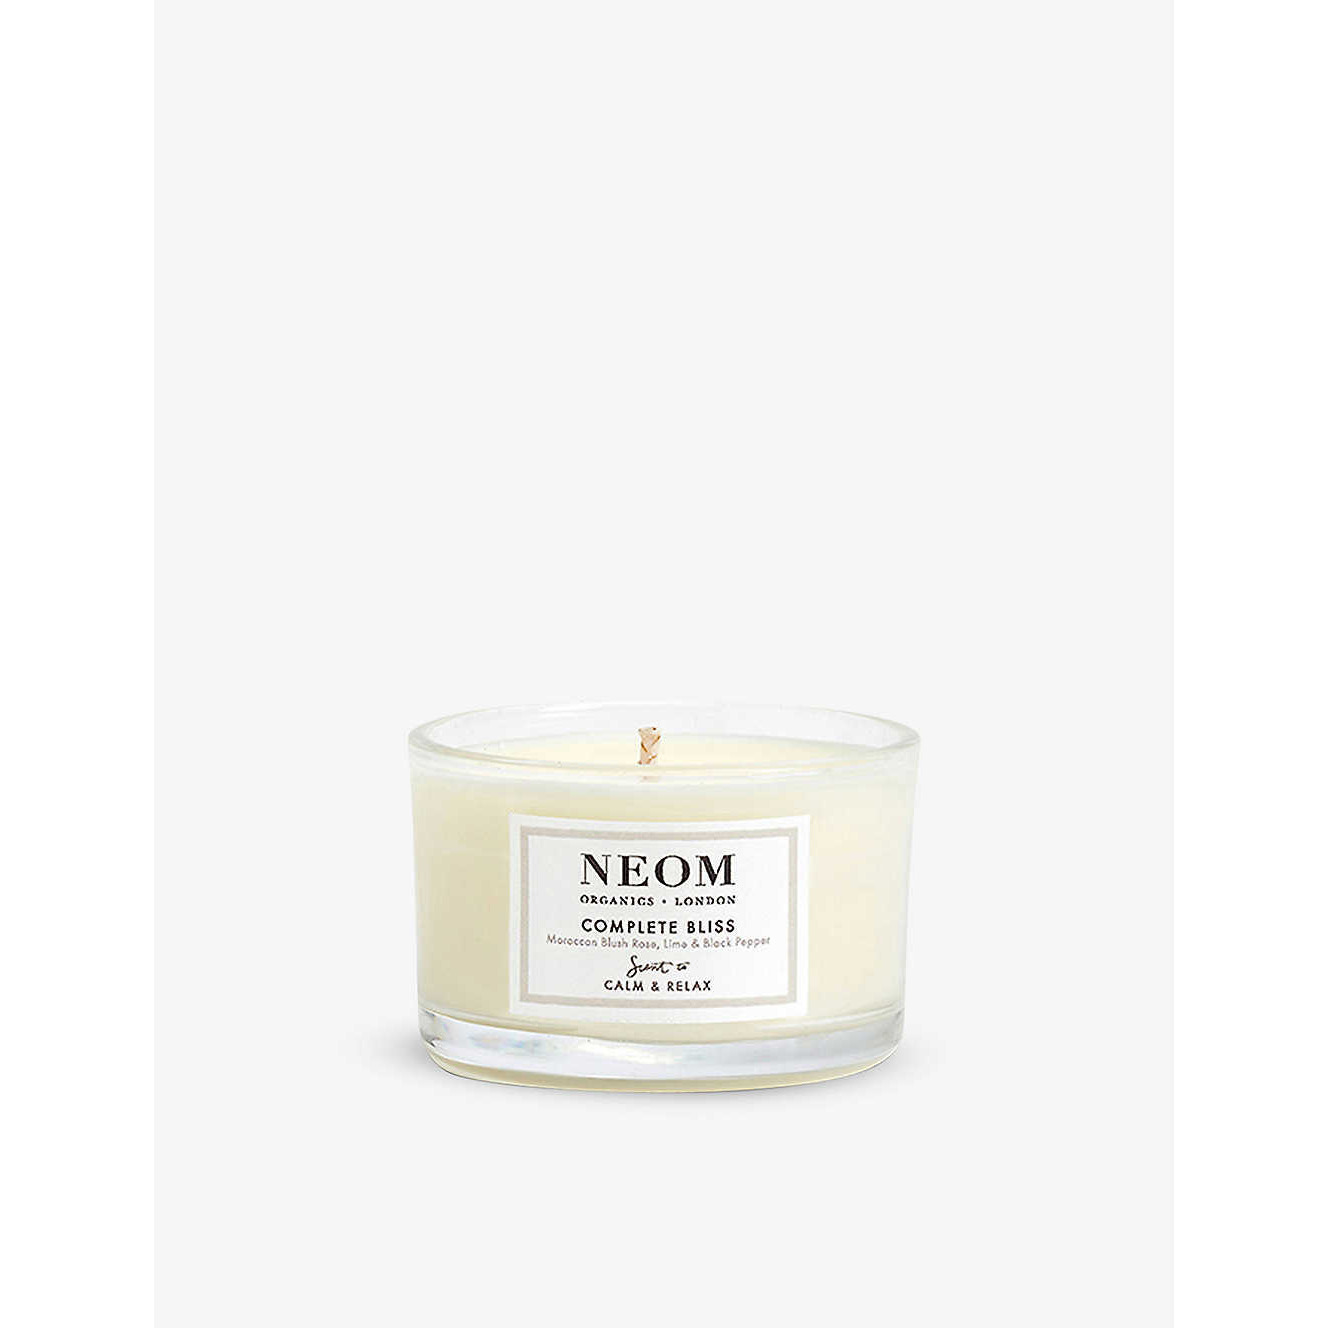 Neom Luxury Organics Complete bliss travel candle